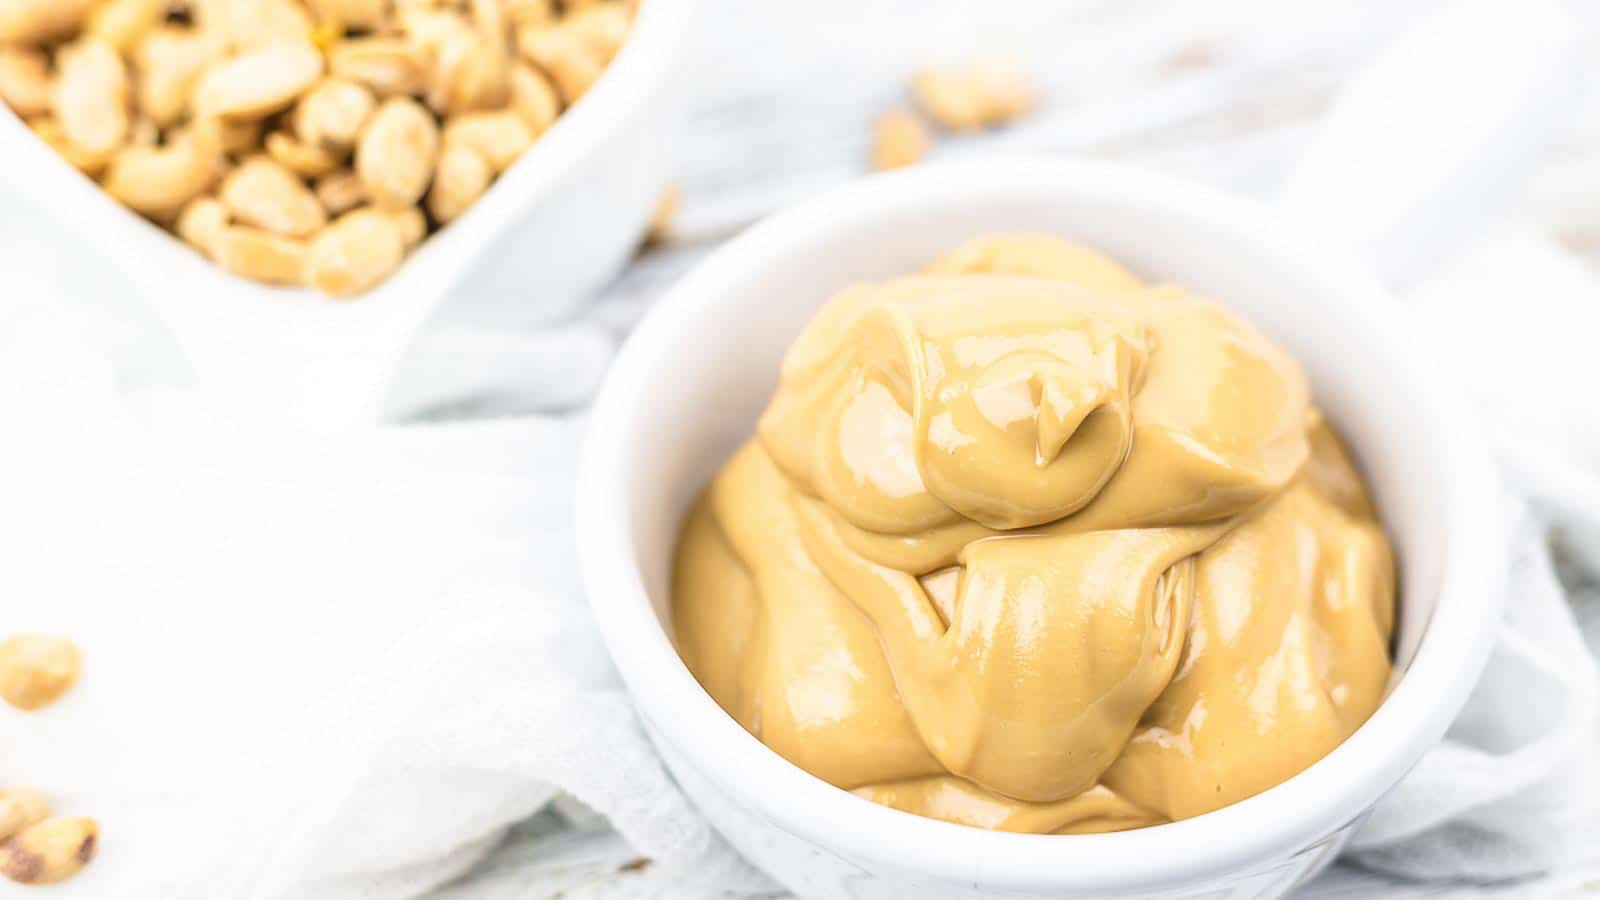 Peanut butter in a bowl next to peanuts.